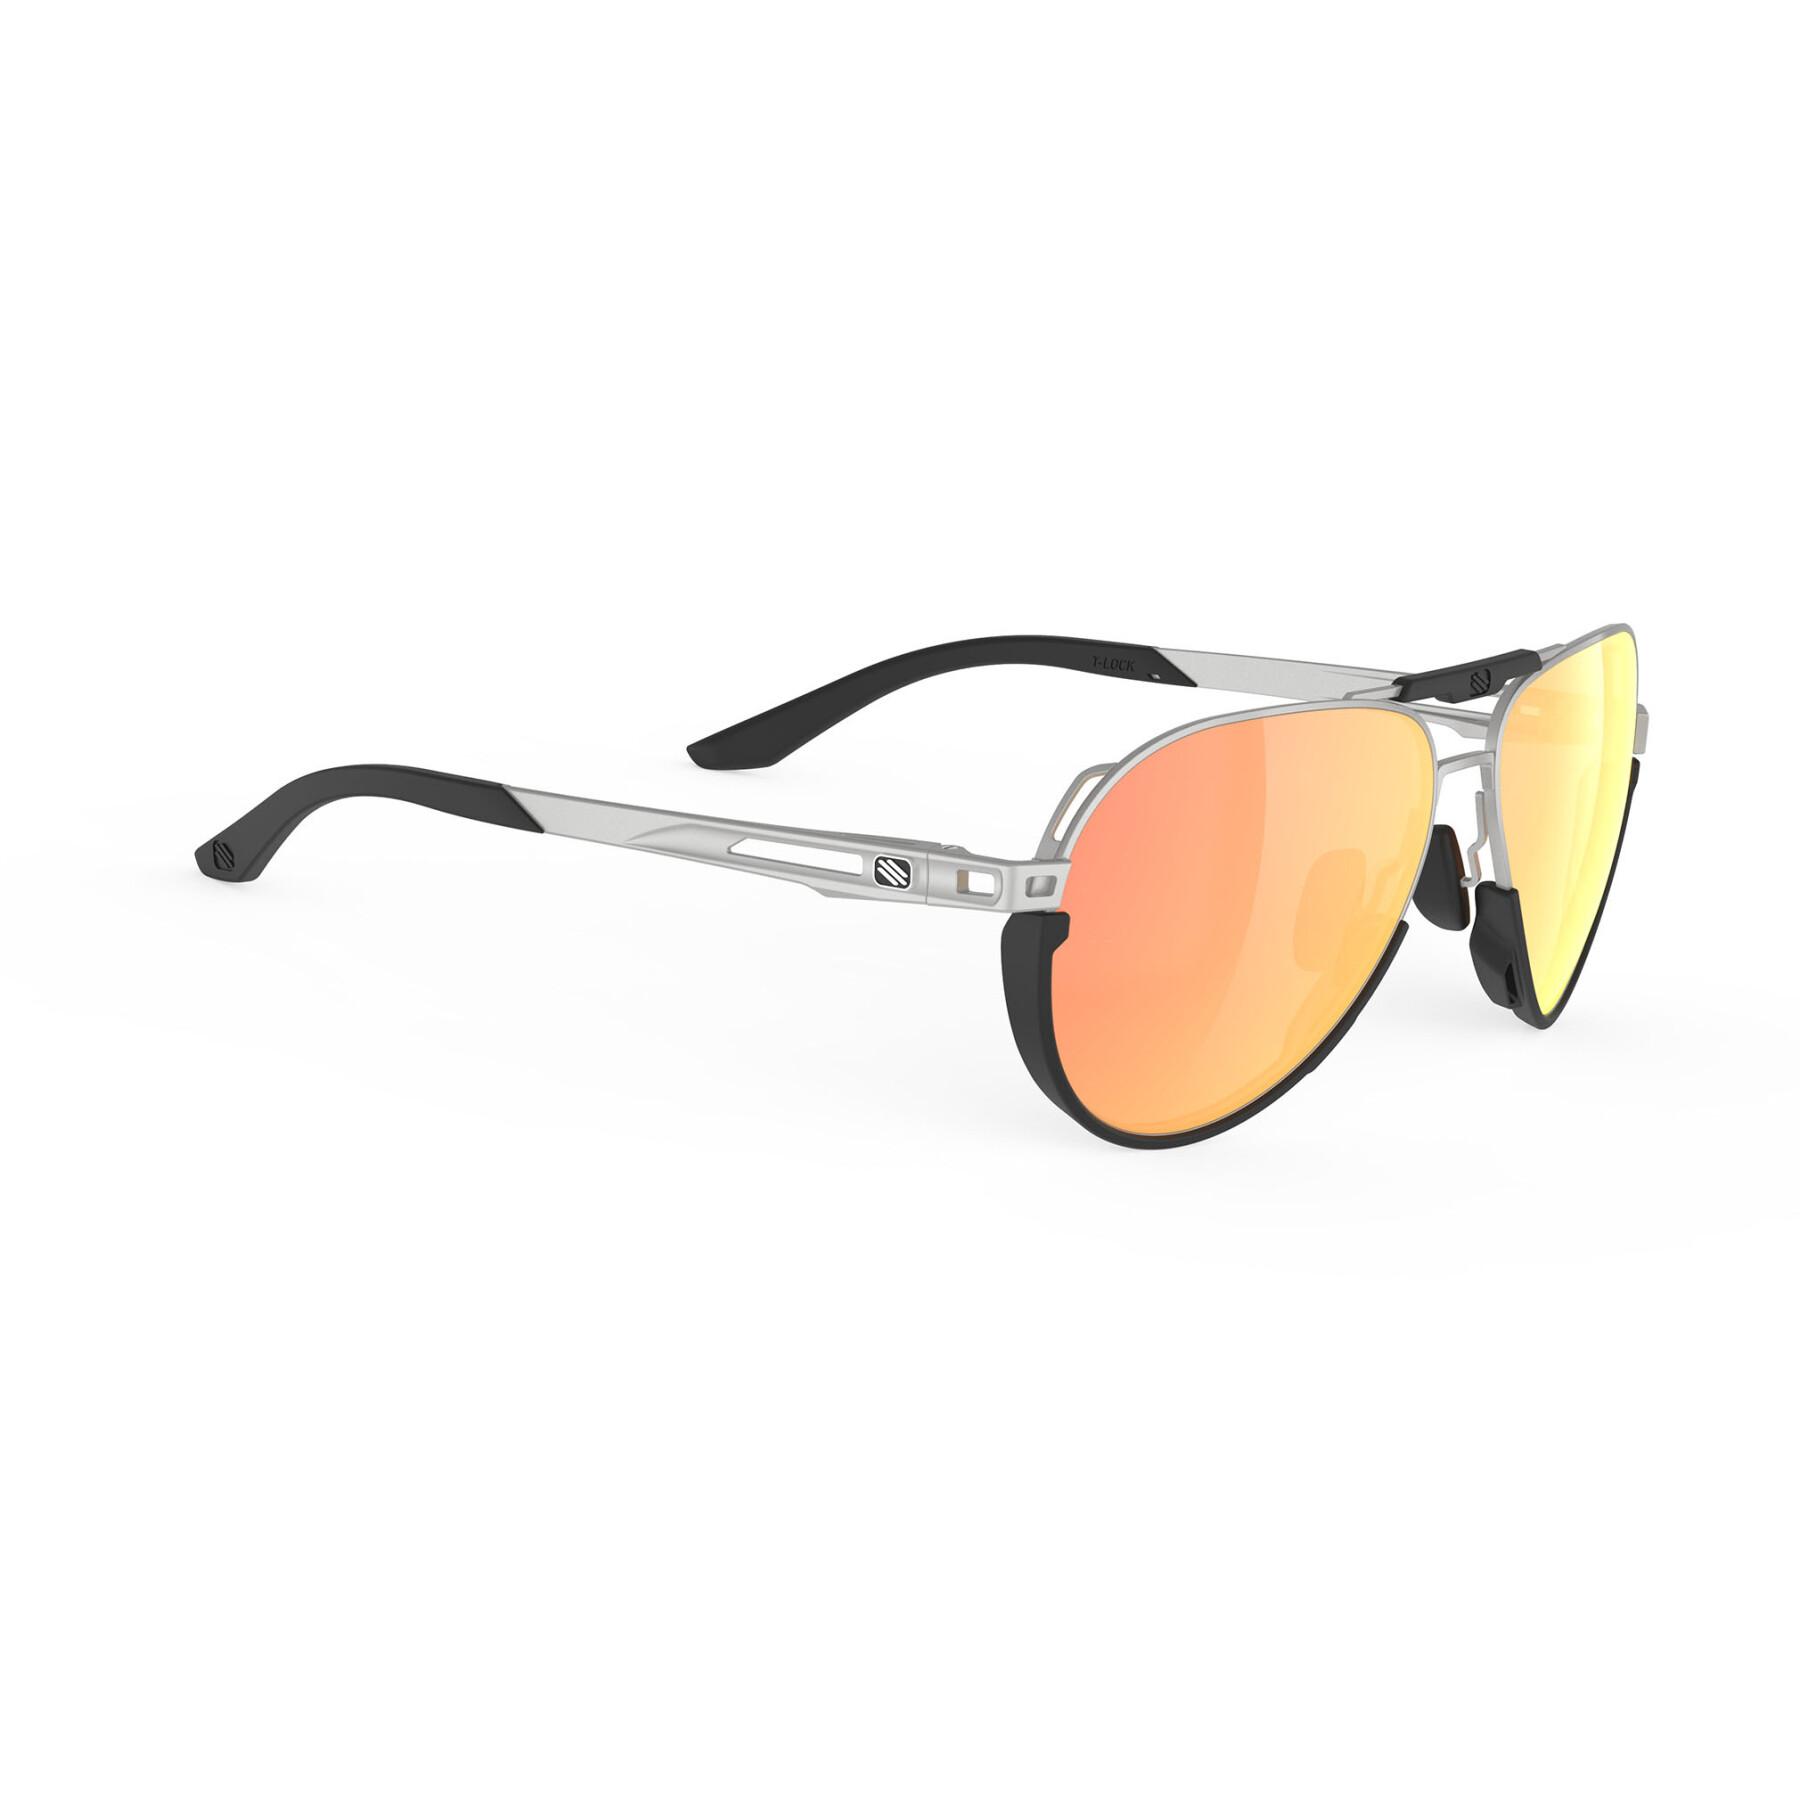 Sunglasses Rudy Project skytrail